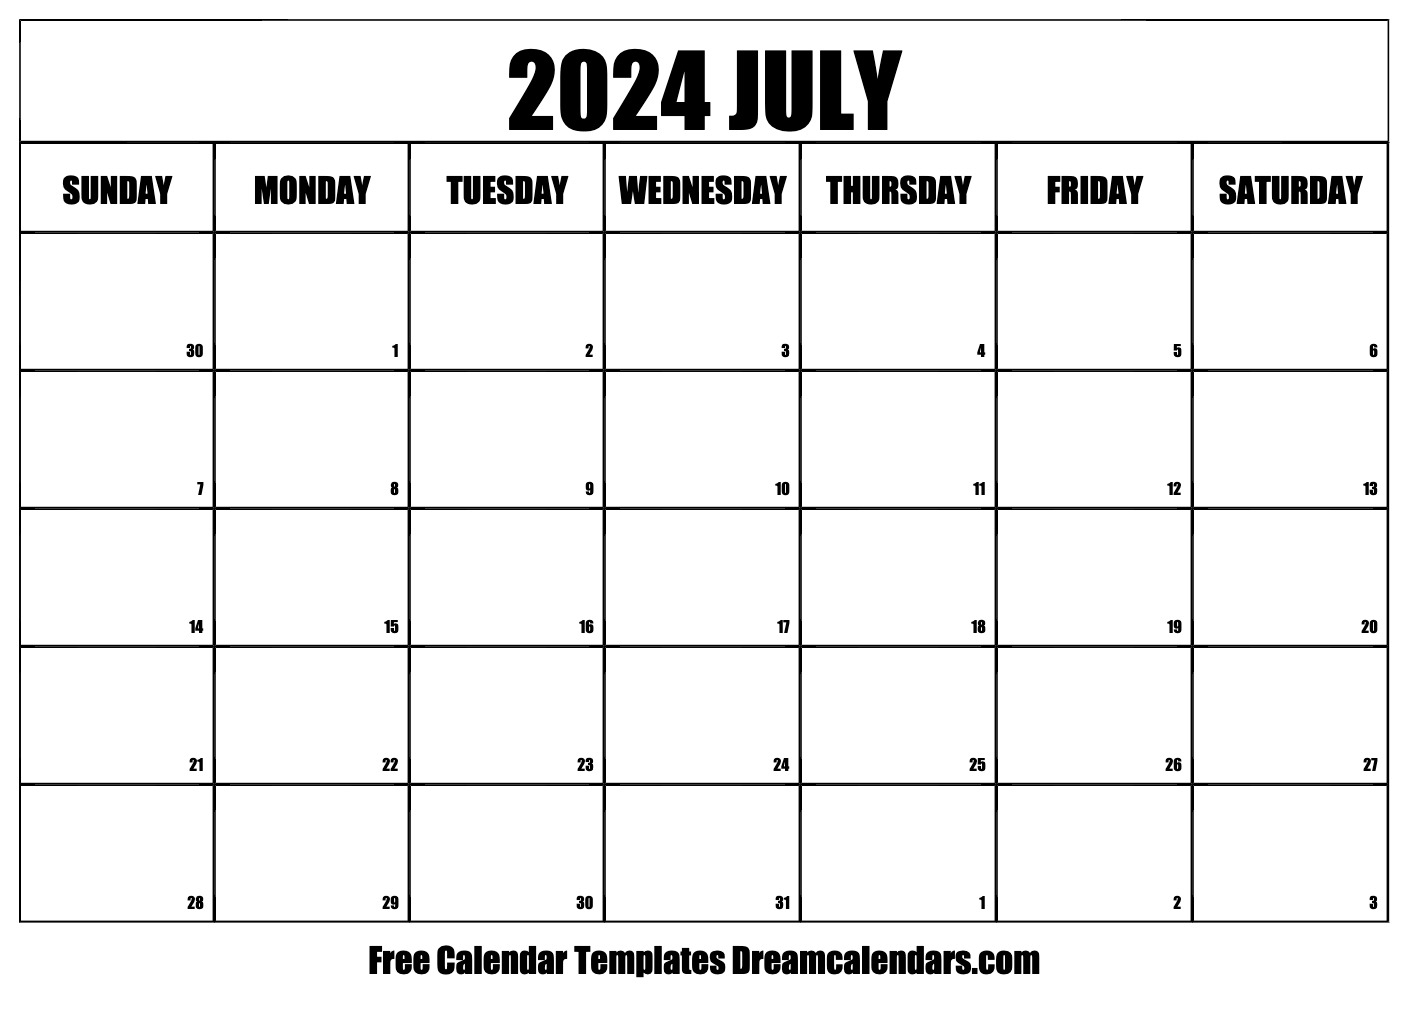 July 2024 Calendar | Free Blank Printable With Holidays for Free July 2024 Printable Calendar